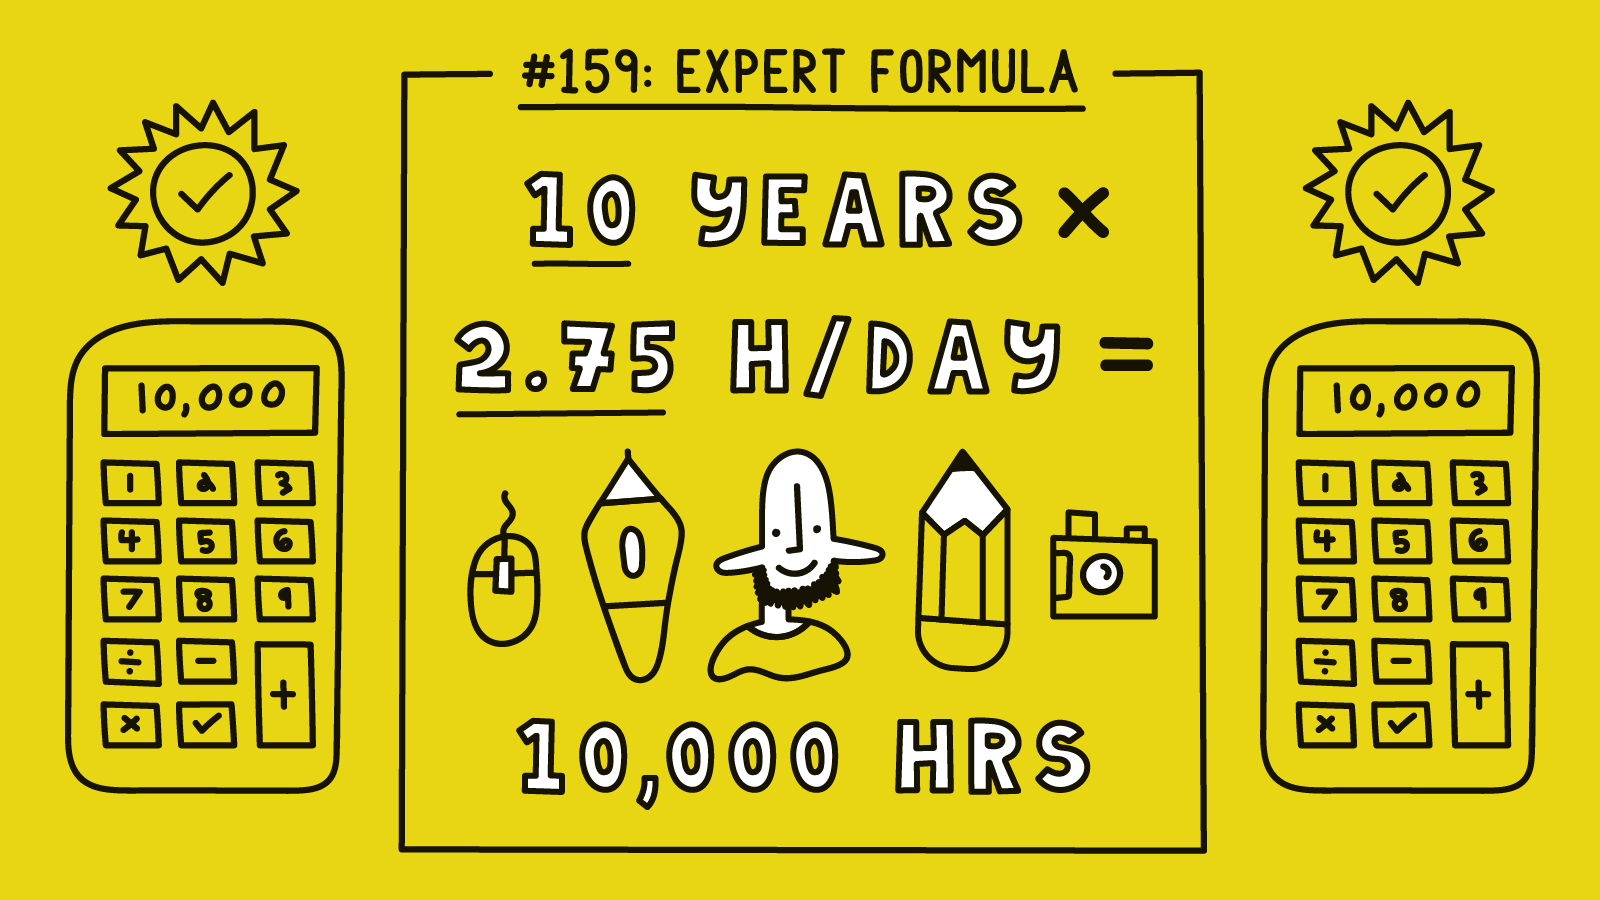 #159: How to Calculate Your Path to 10,000 Hours & Expert Status